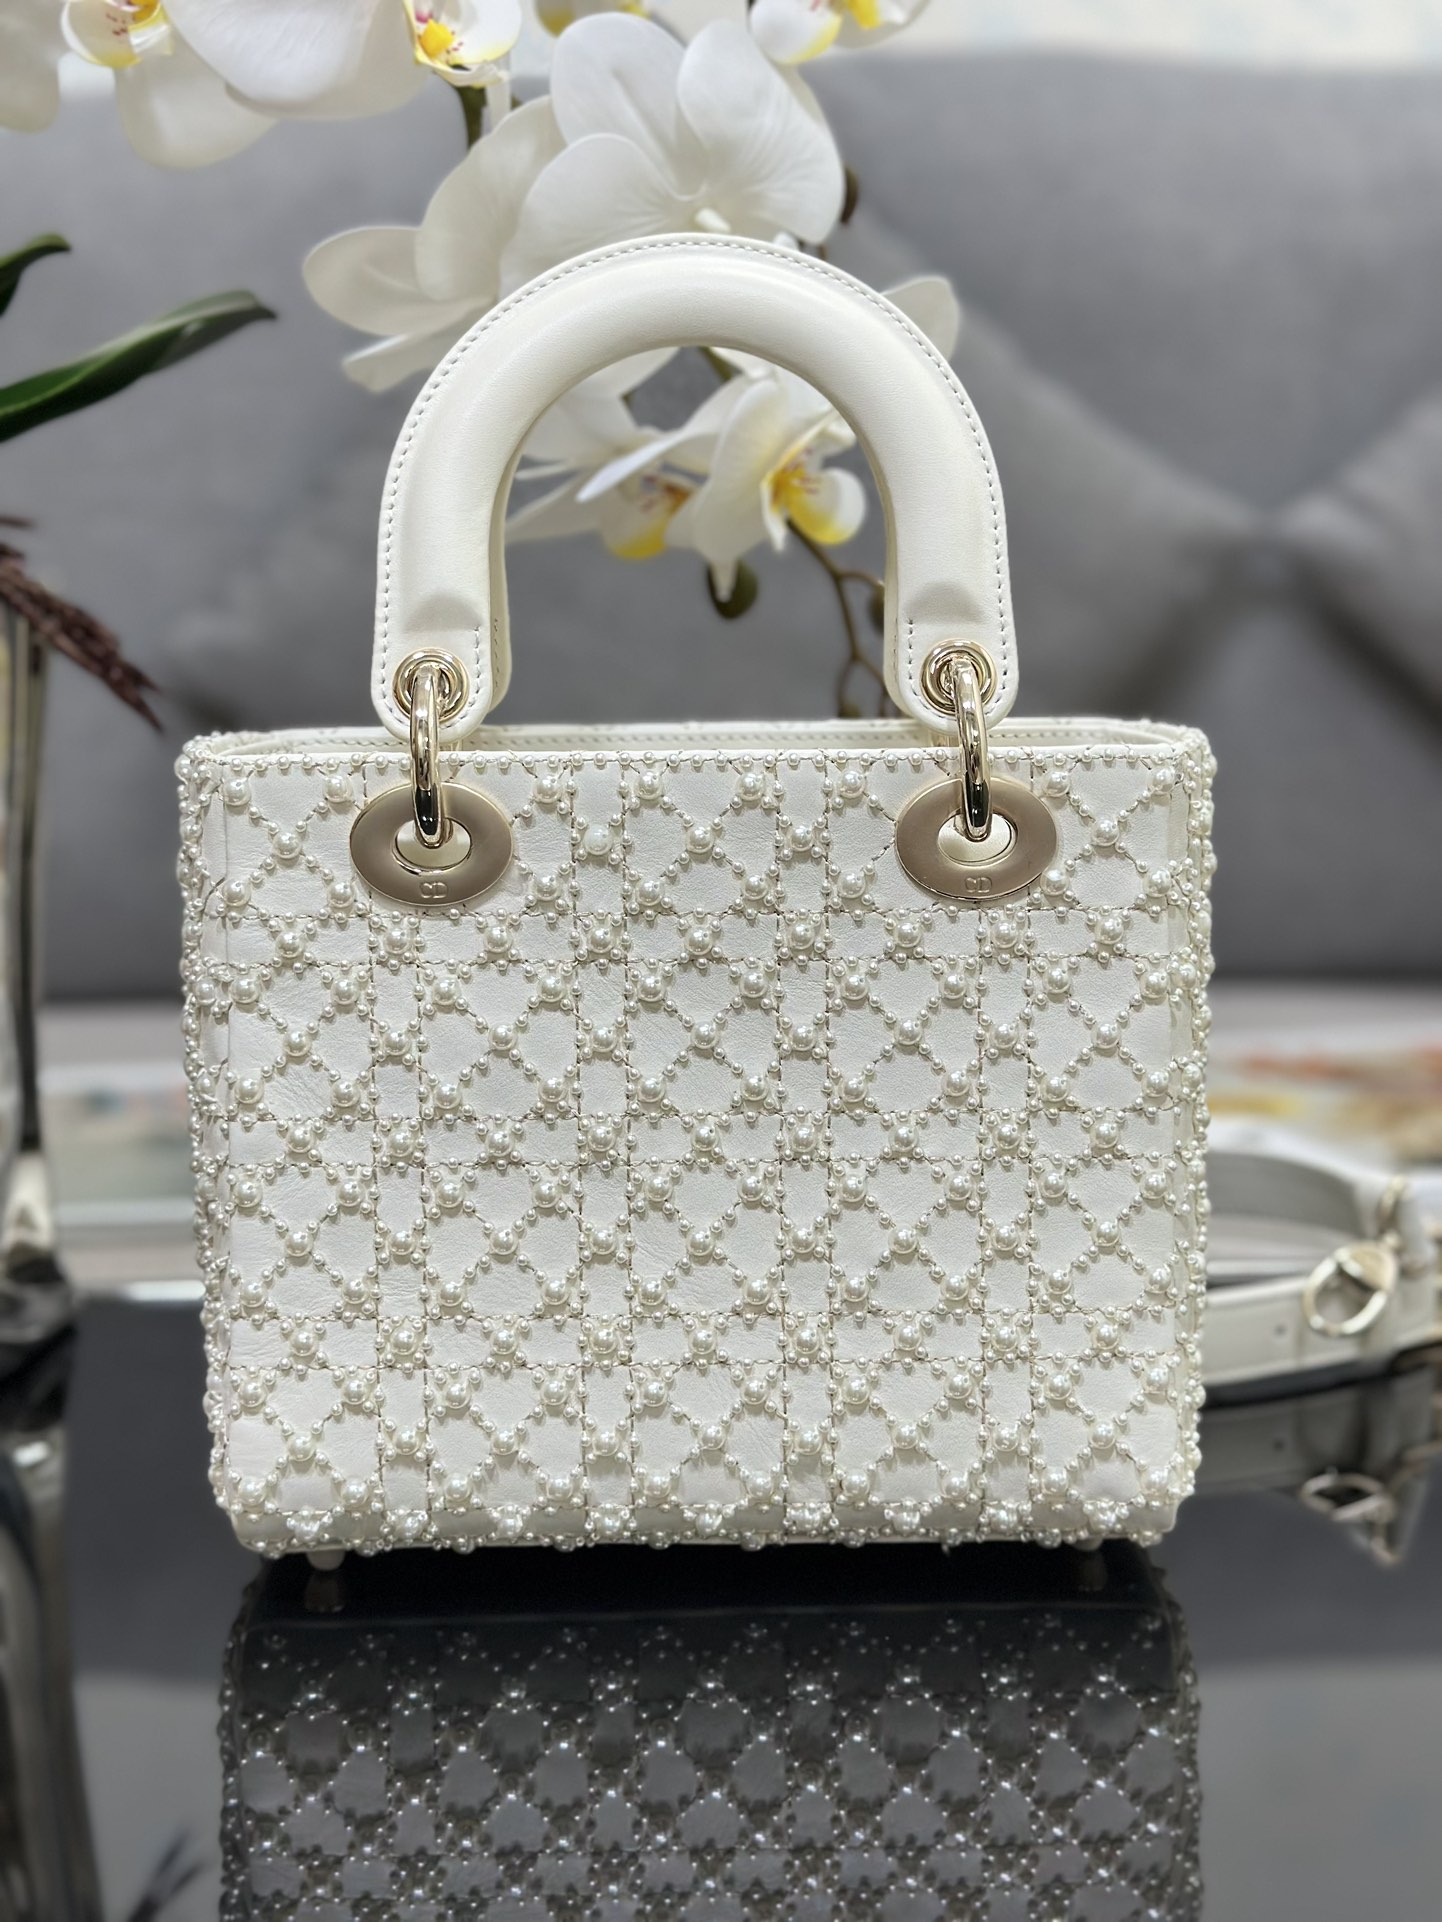 Replica Lady DIOR Bag with Four squares embroider half a pearl